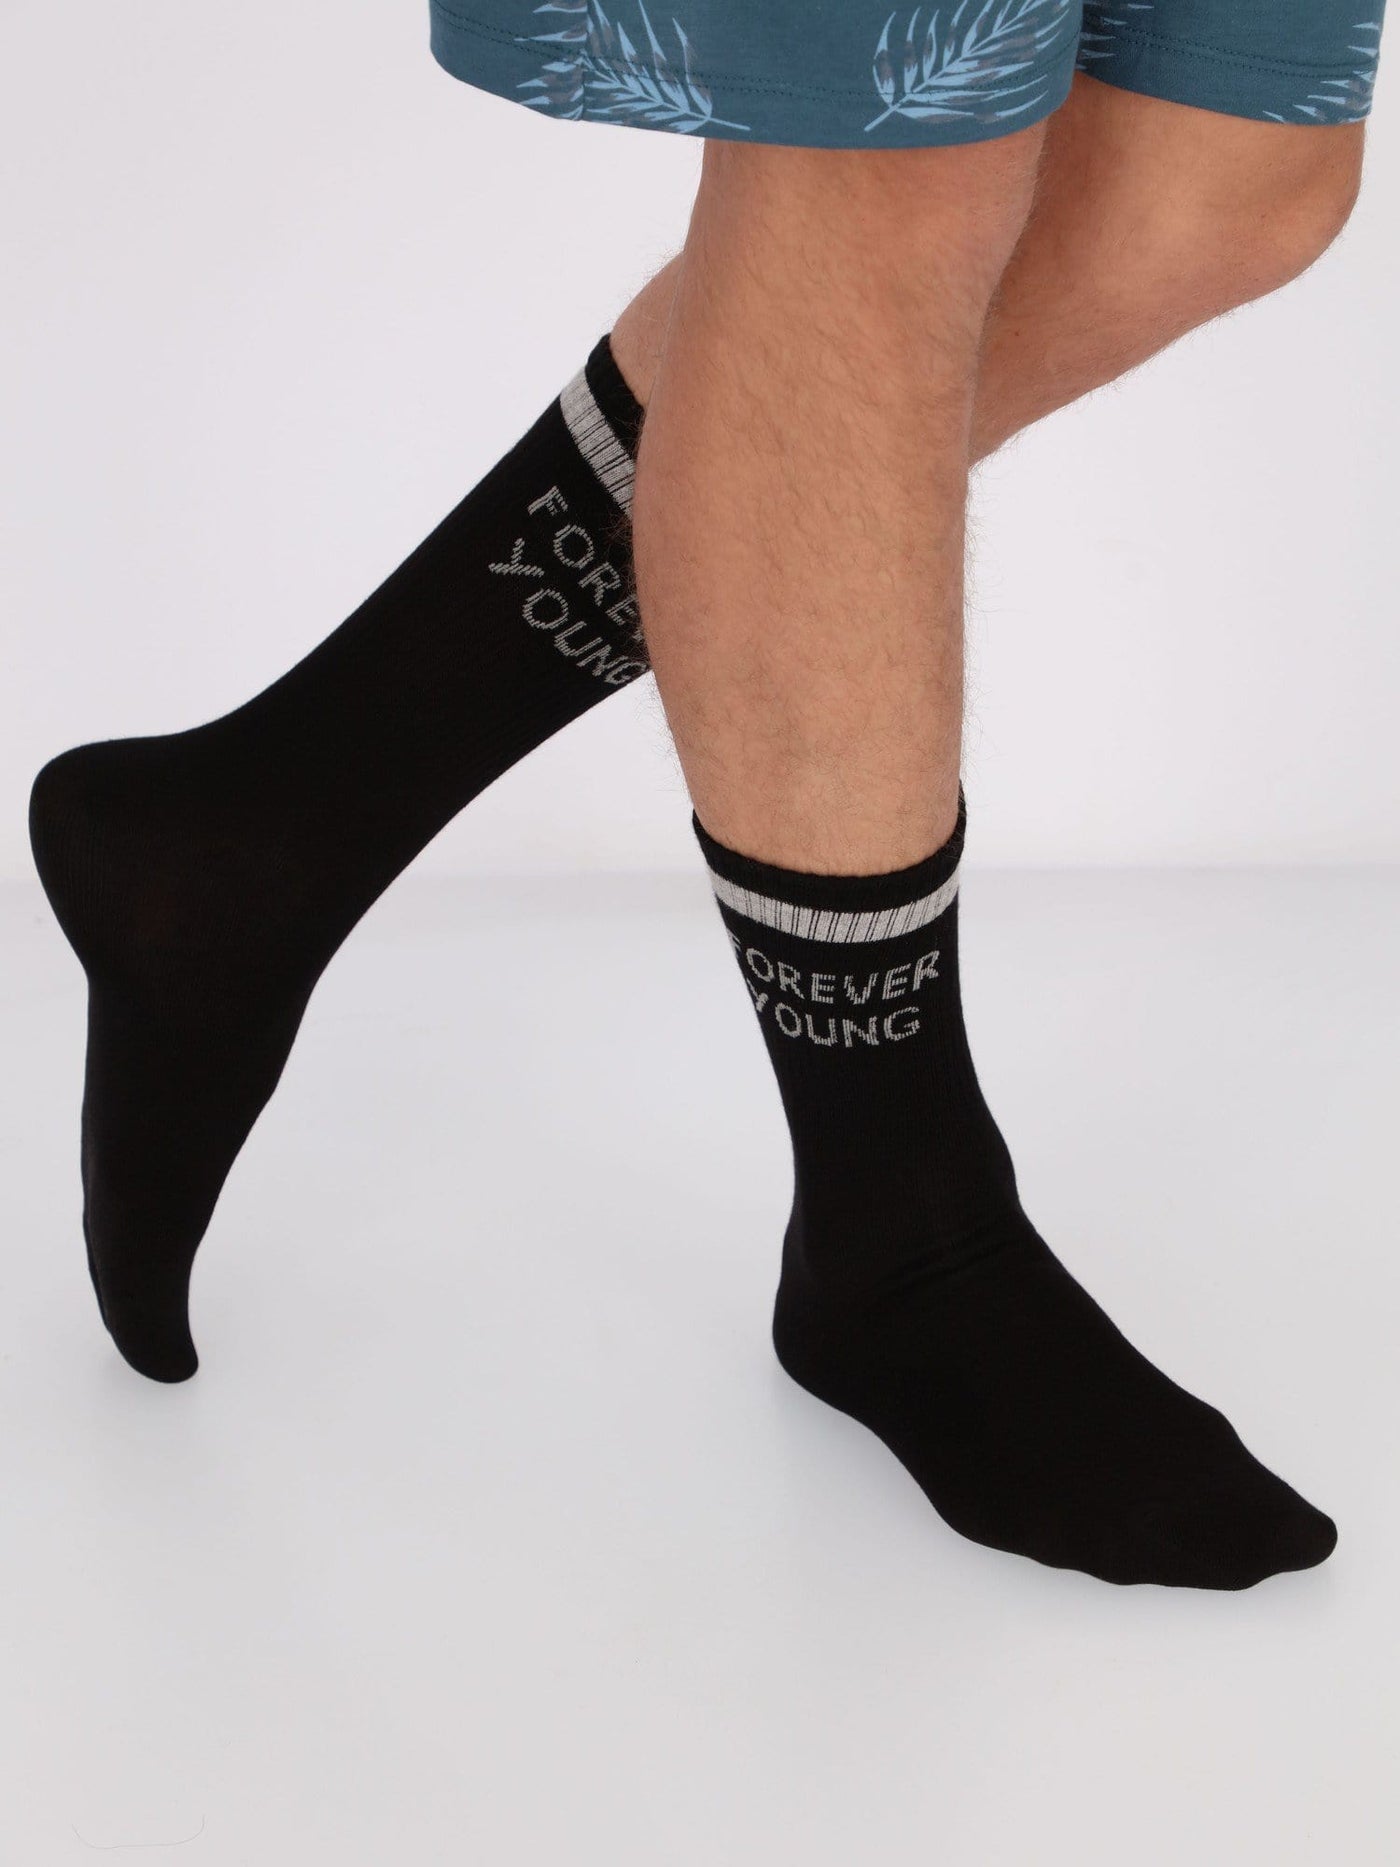 OR Other Accessories grey chine / Os 2 Pairs Forever Young Mid Calf Length Socks